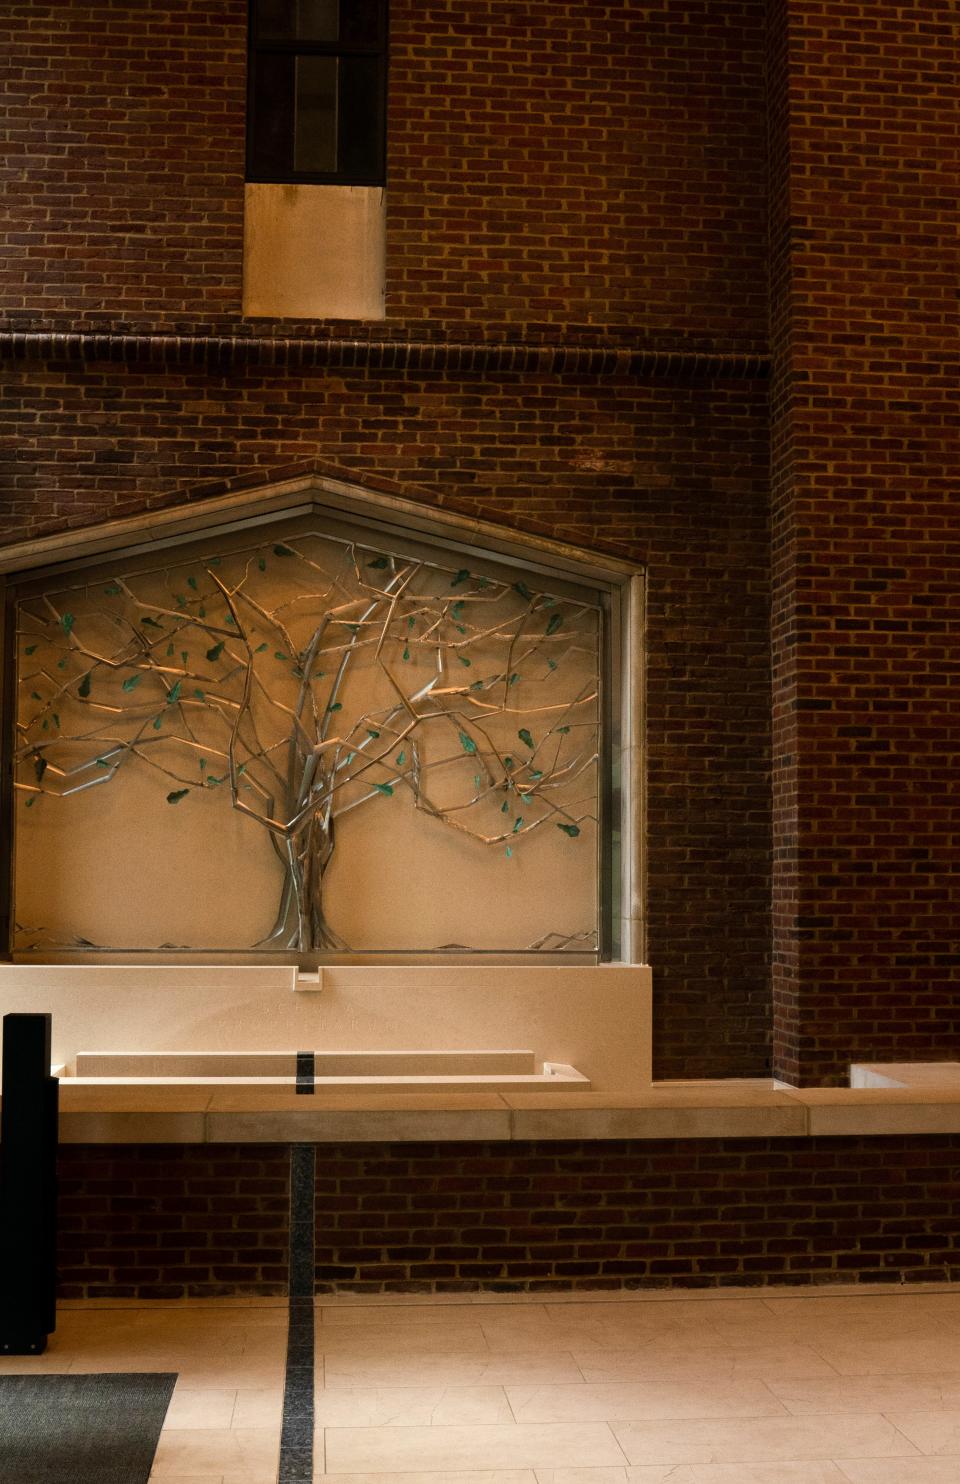 Schola Prophetarum (school of prophets) is inscribed below a tree sculpture at the entrance to Vanderbilt University Divinity School Thursday, July 6, 2023. The sculpture was created using stainless steel for the tree and salvaged copper from the building's older side entrances to make the tree's leaves.